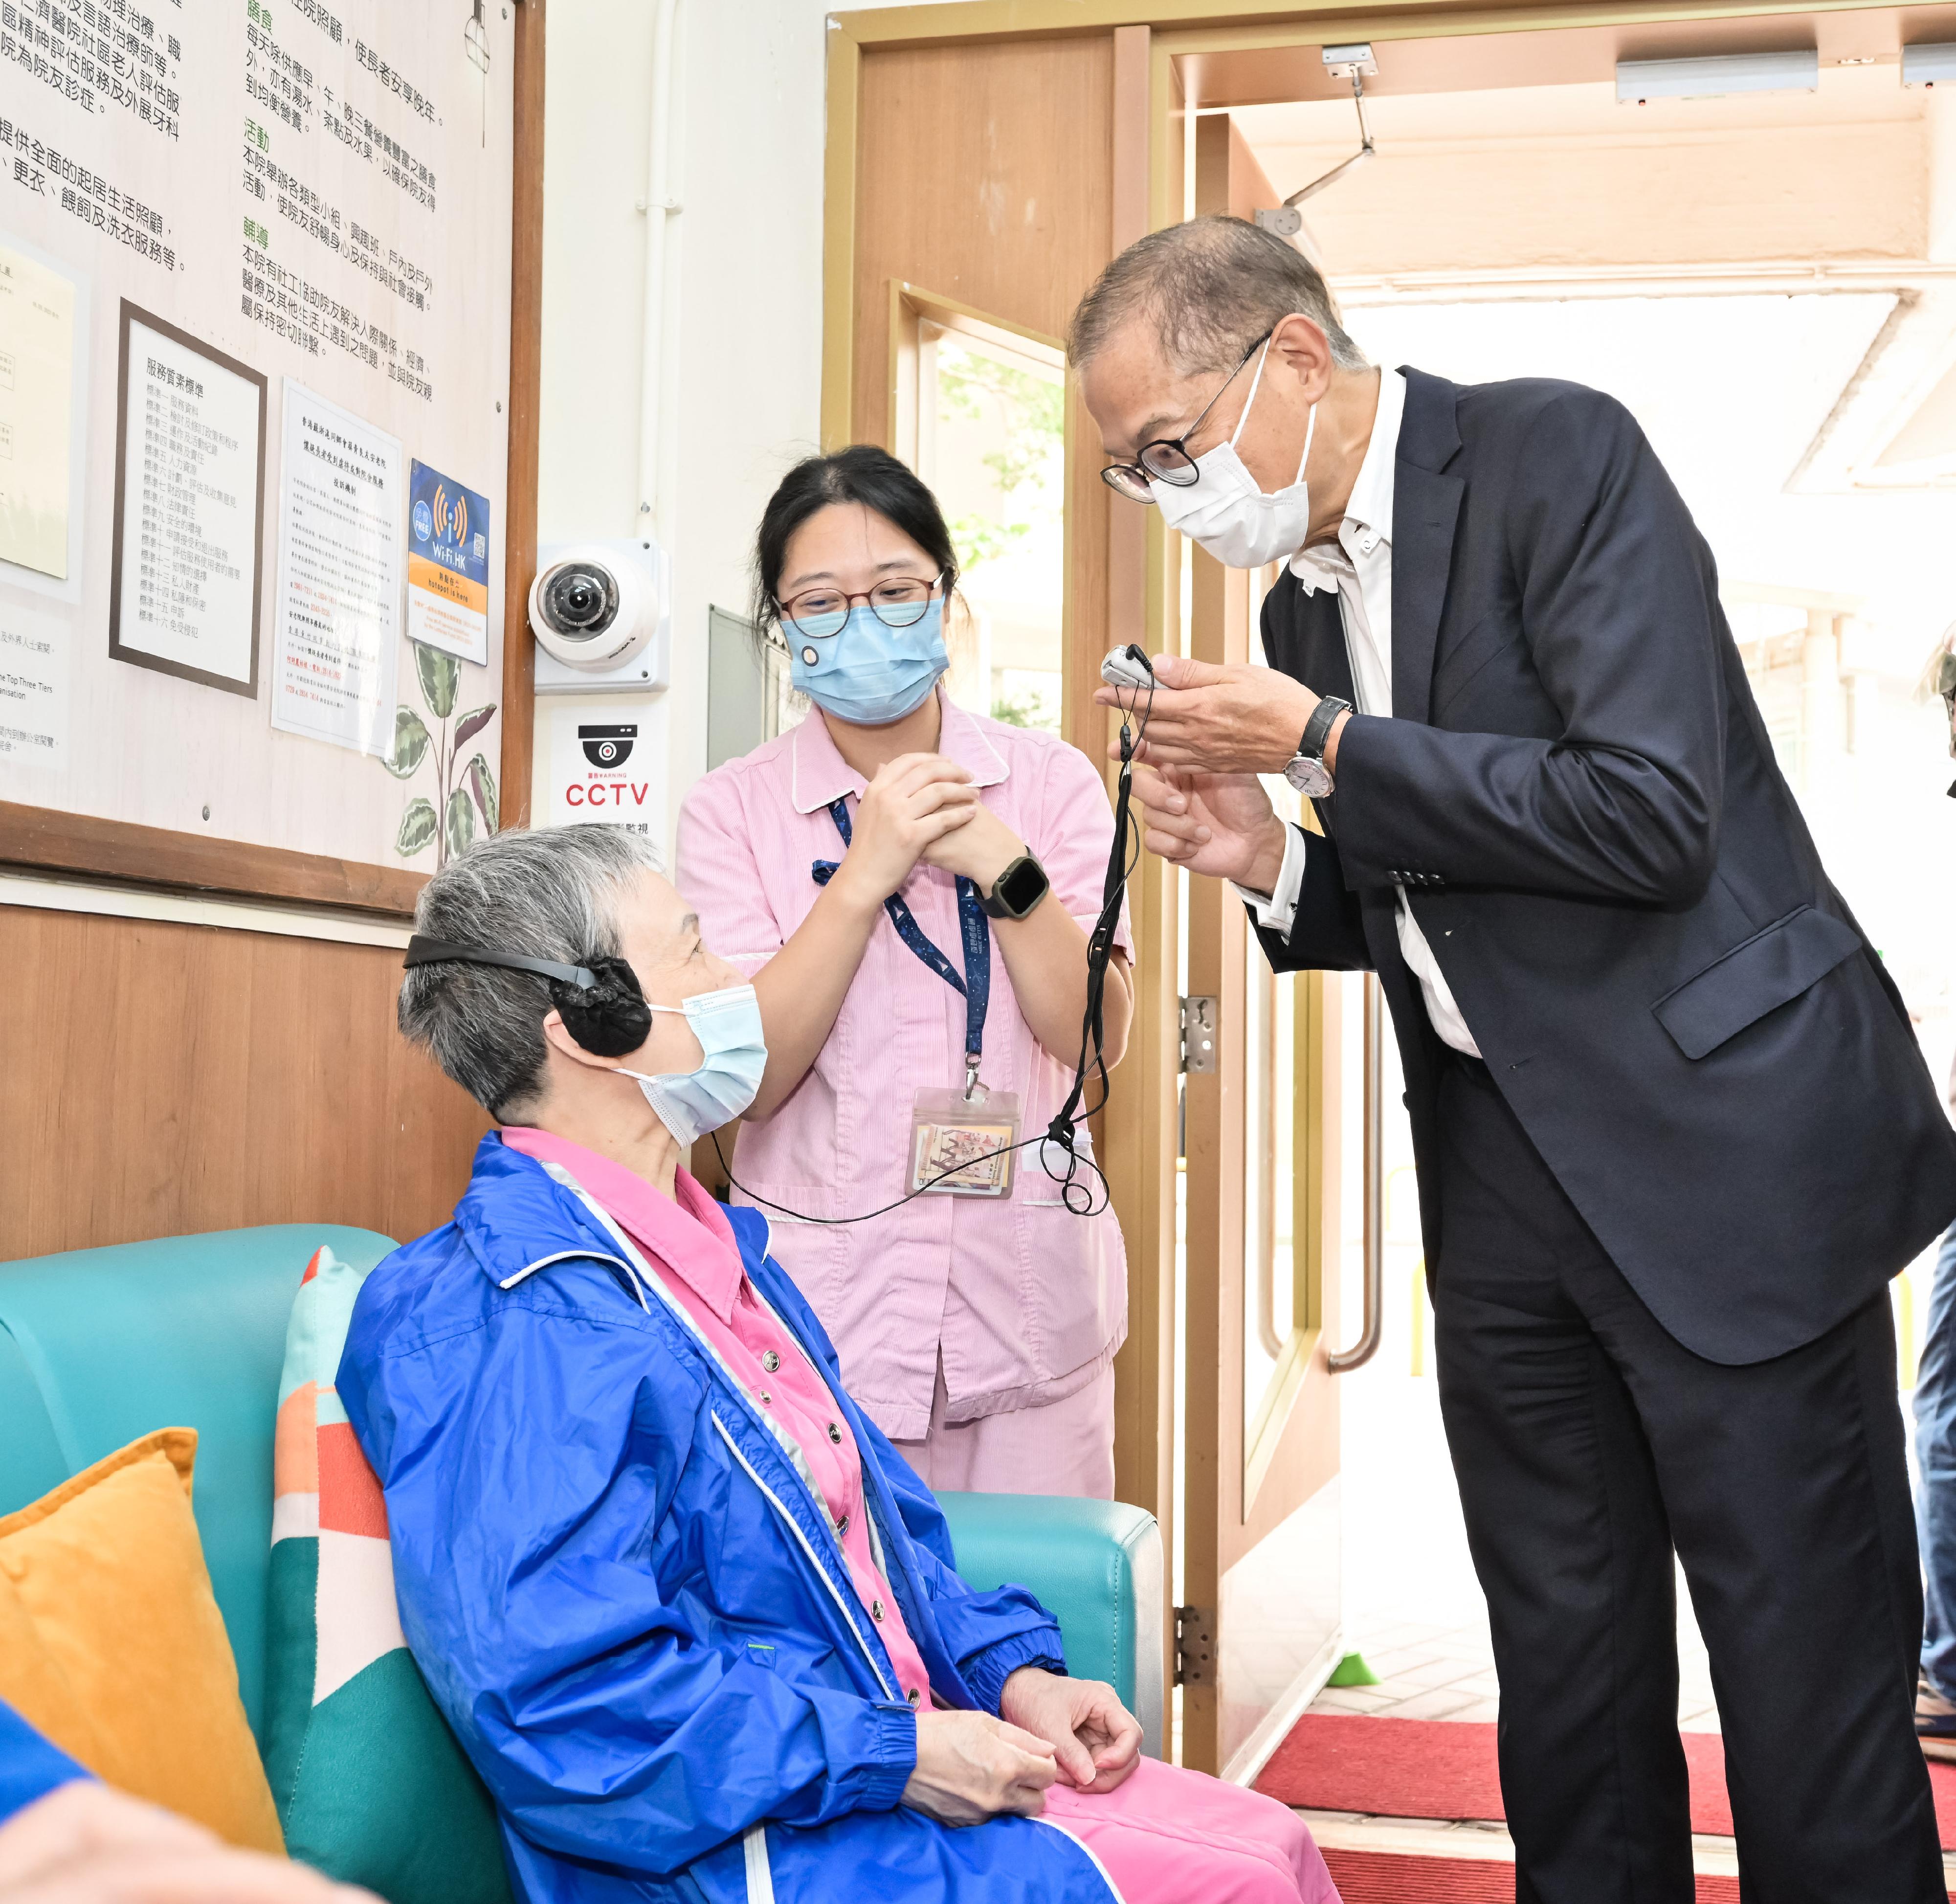 The Secretary for Health, Professor Lo Chung-mau, visited a residential care home for the elderly (RCHE) in Kwai Tsing District this afternoon (November 3) to get a better grasp of the basic dental care services provided to residents of RCHEs by outreach dental teams. Photo shows Professor Lo (first right) chatting with a resident of the RCHE to listen to her views on the services.